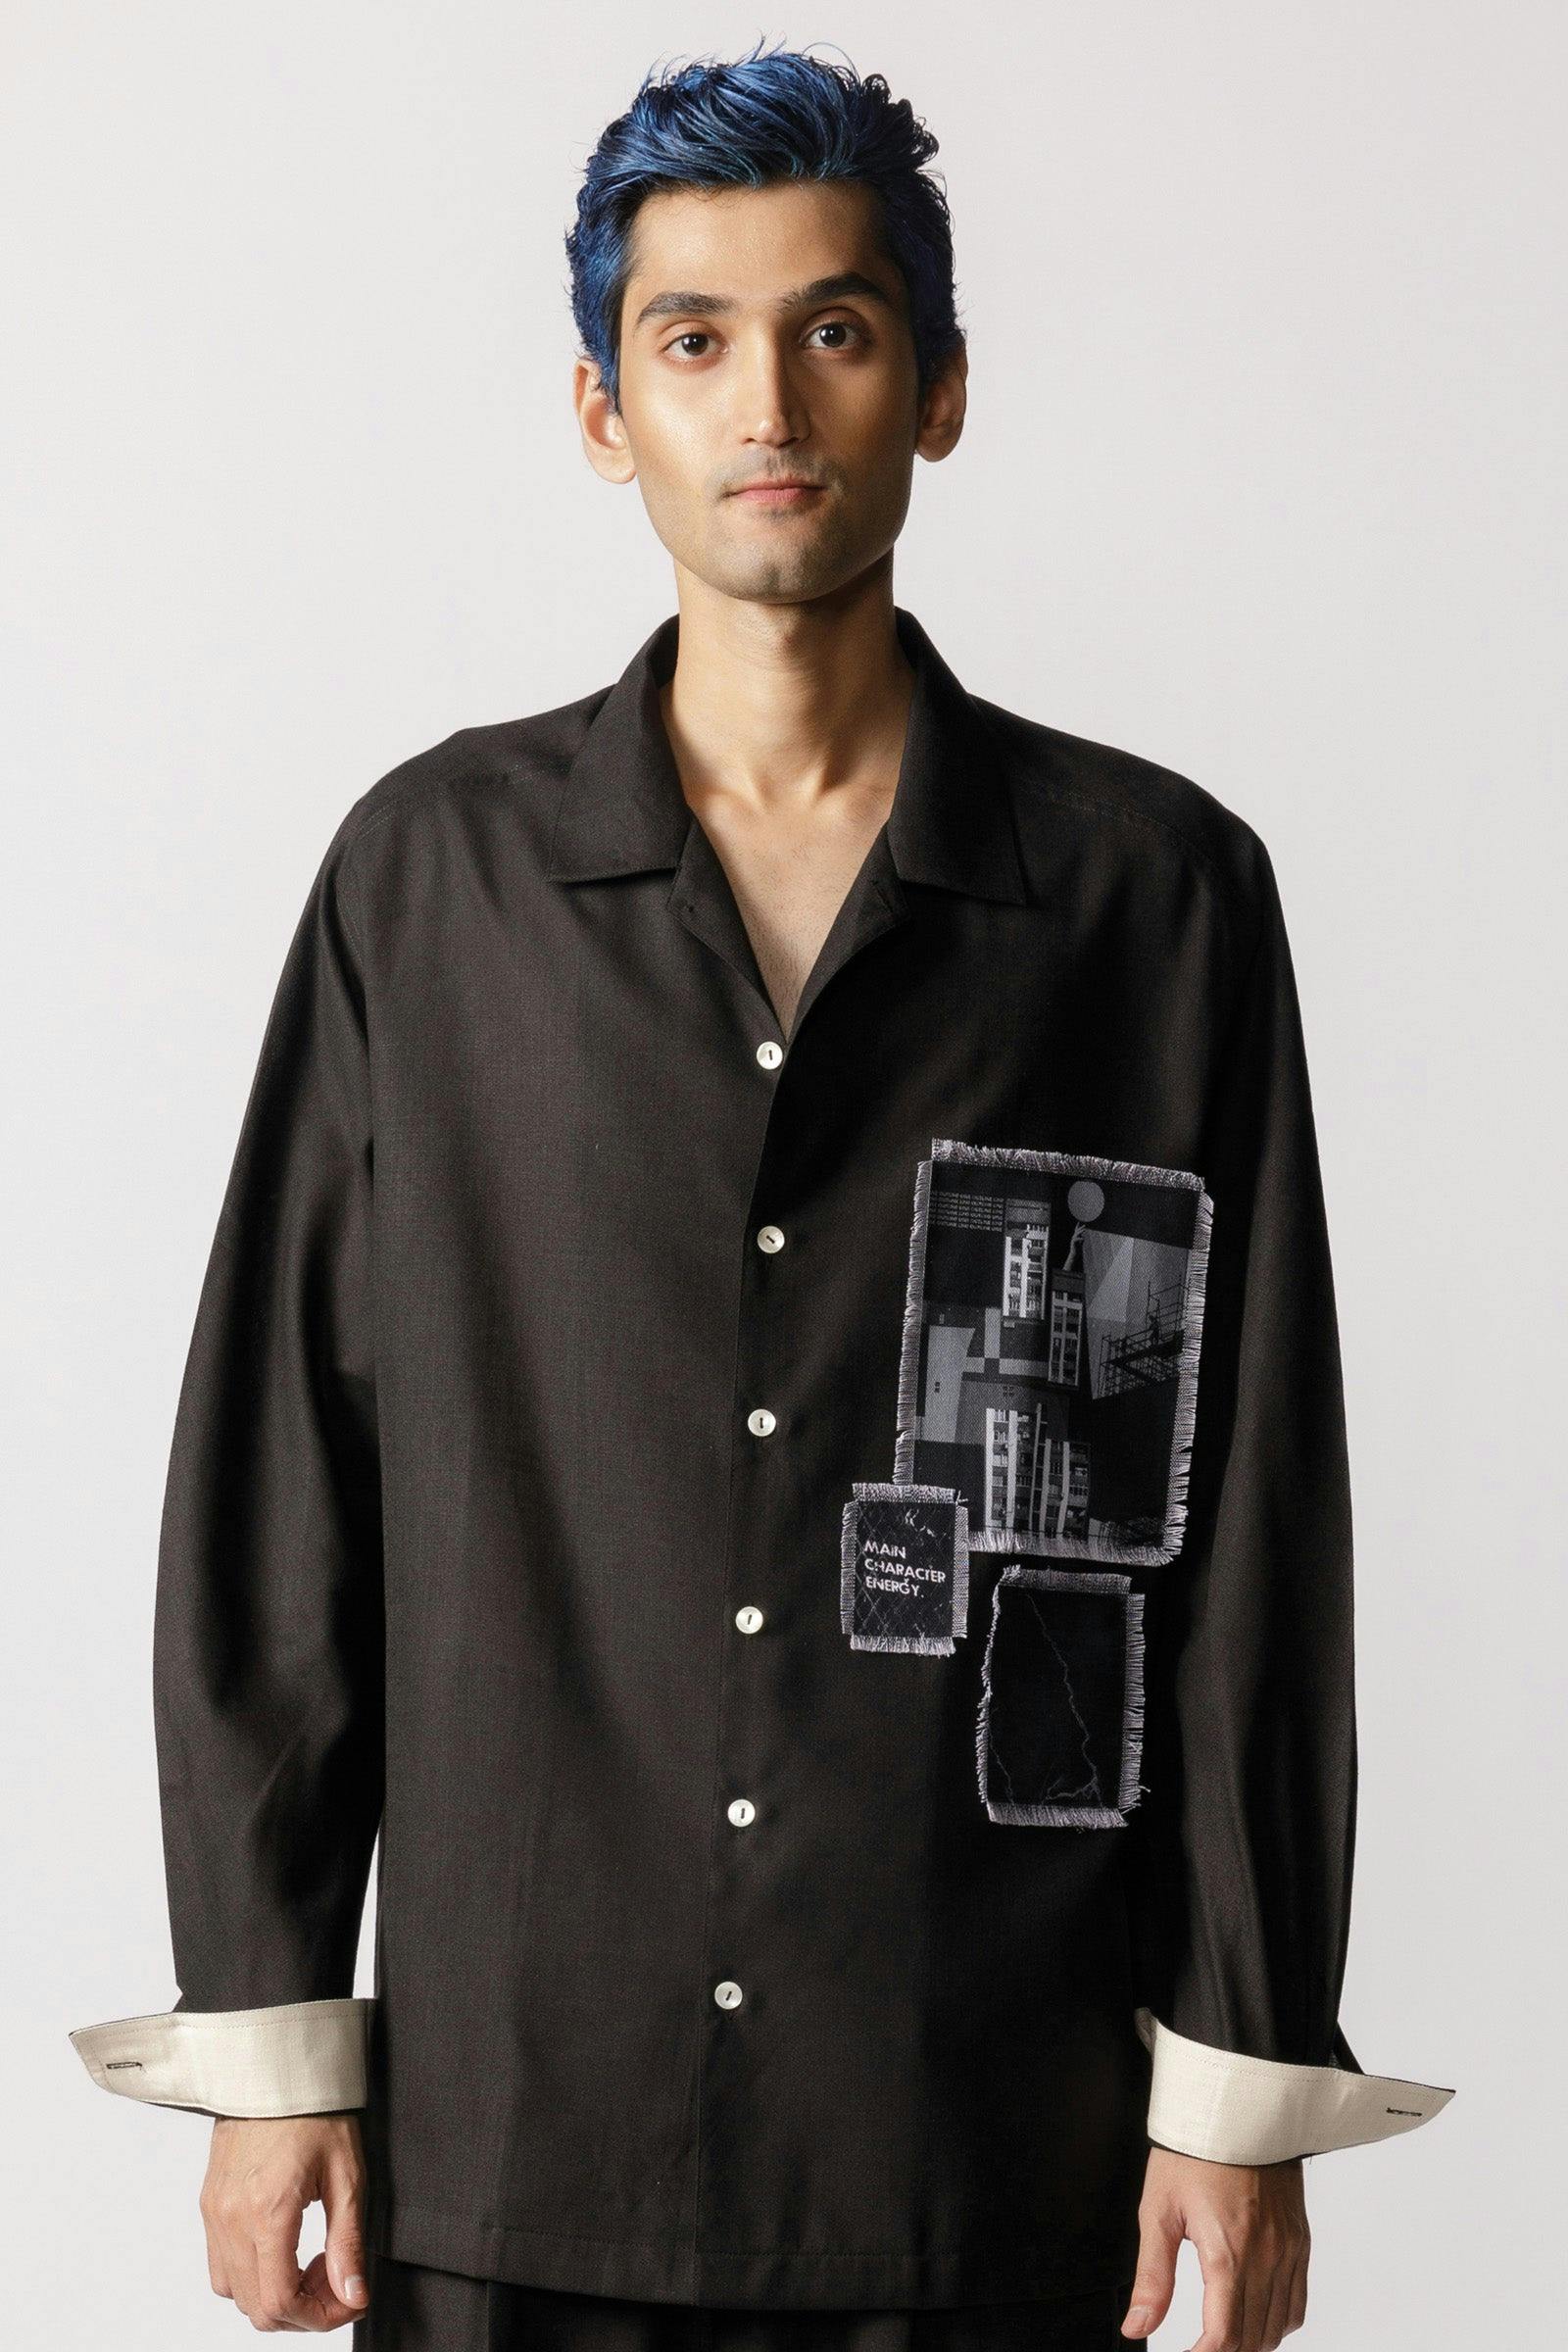 Oversized Patch work shirt, a product by Line Outline